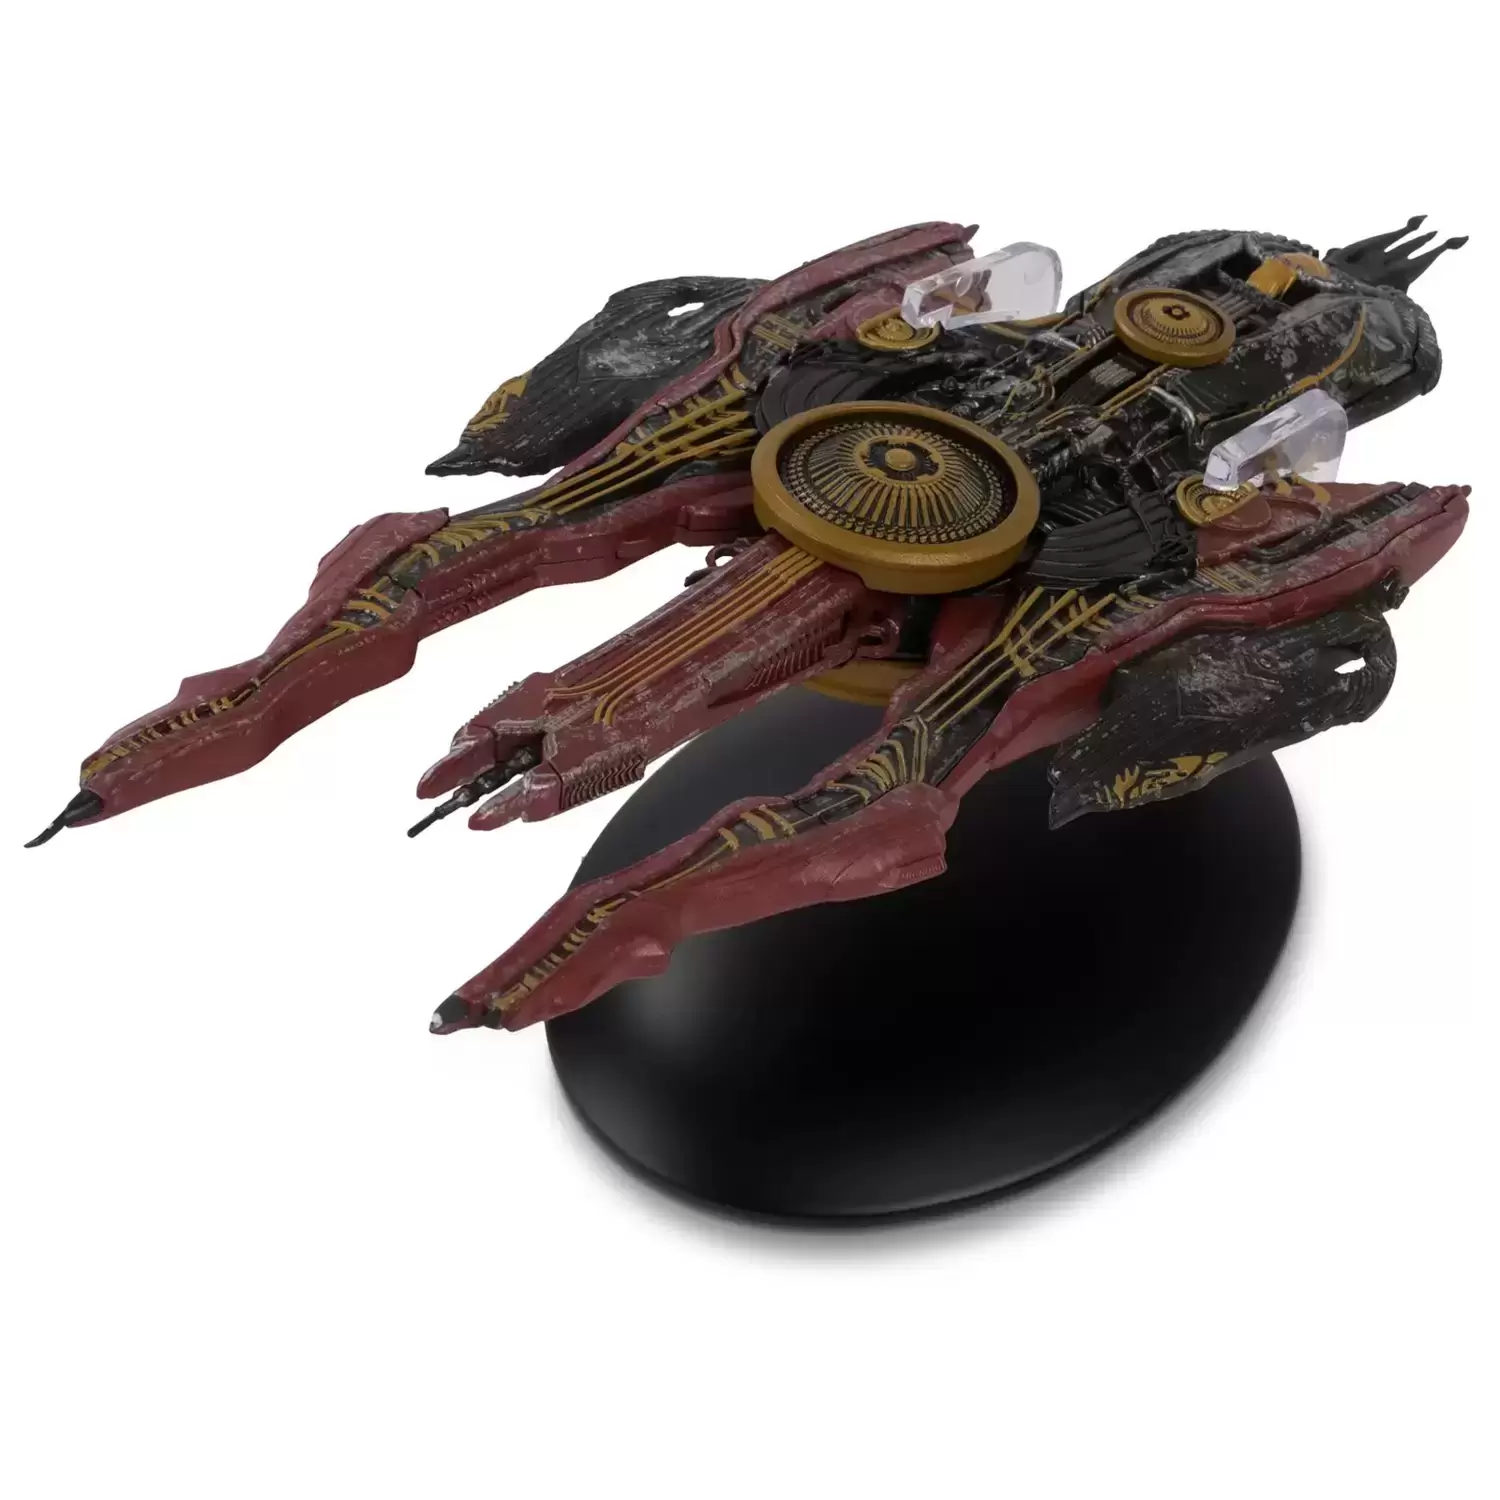 Star Trek Discovery The Official Starships Collection - Klingon Qugh-class